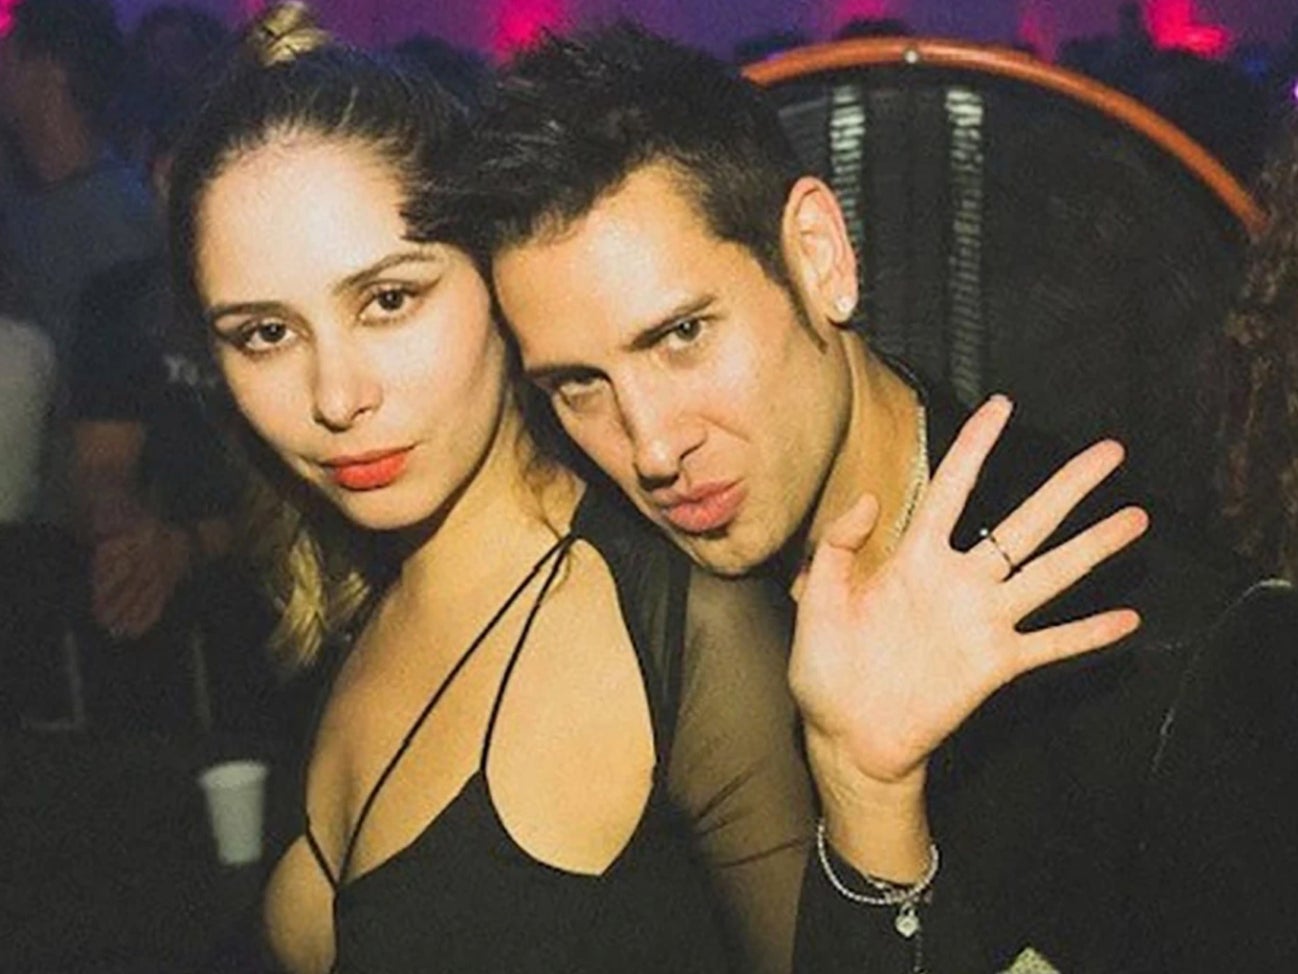 Architectural manager Marcela Cabrales-Arzola, 26, poses with producer David Pearce, at an after-hours warehouse party in downtown LA on Nov. 13. Mr Pearce was later arrested on manslaughter charges connected to the drug overdose deaths of Ms Cabrales-Arzola and her model friend, Christy Giles.